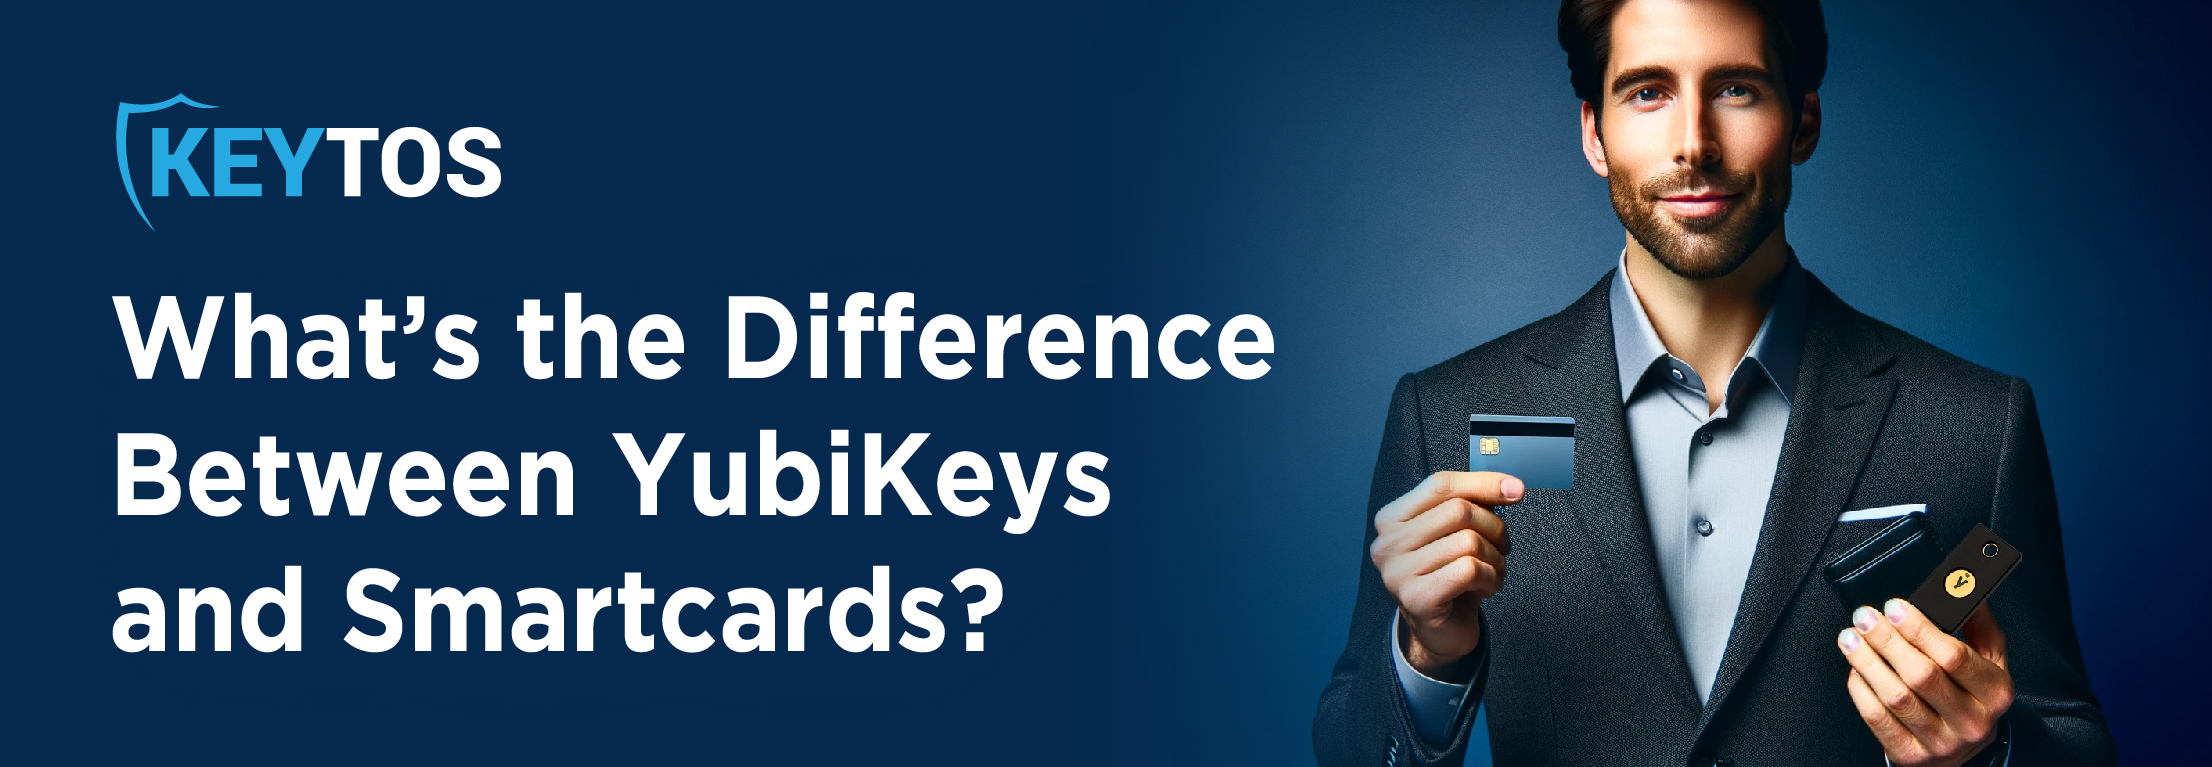 What is the Difference Between Smartcards and YubiKeys?